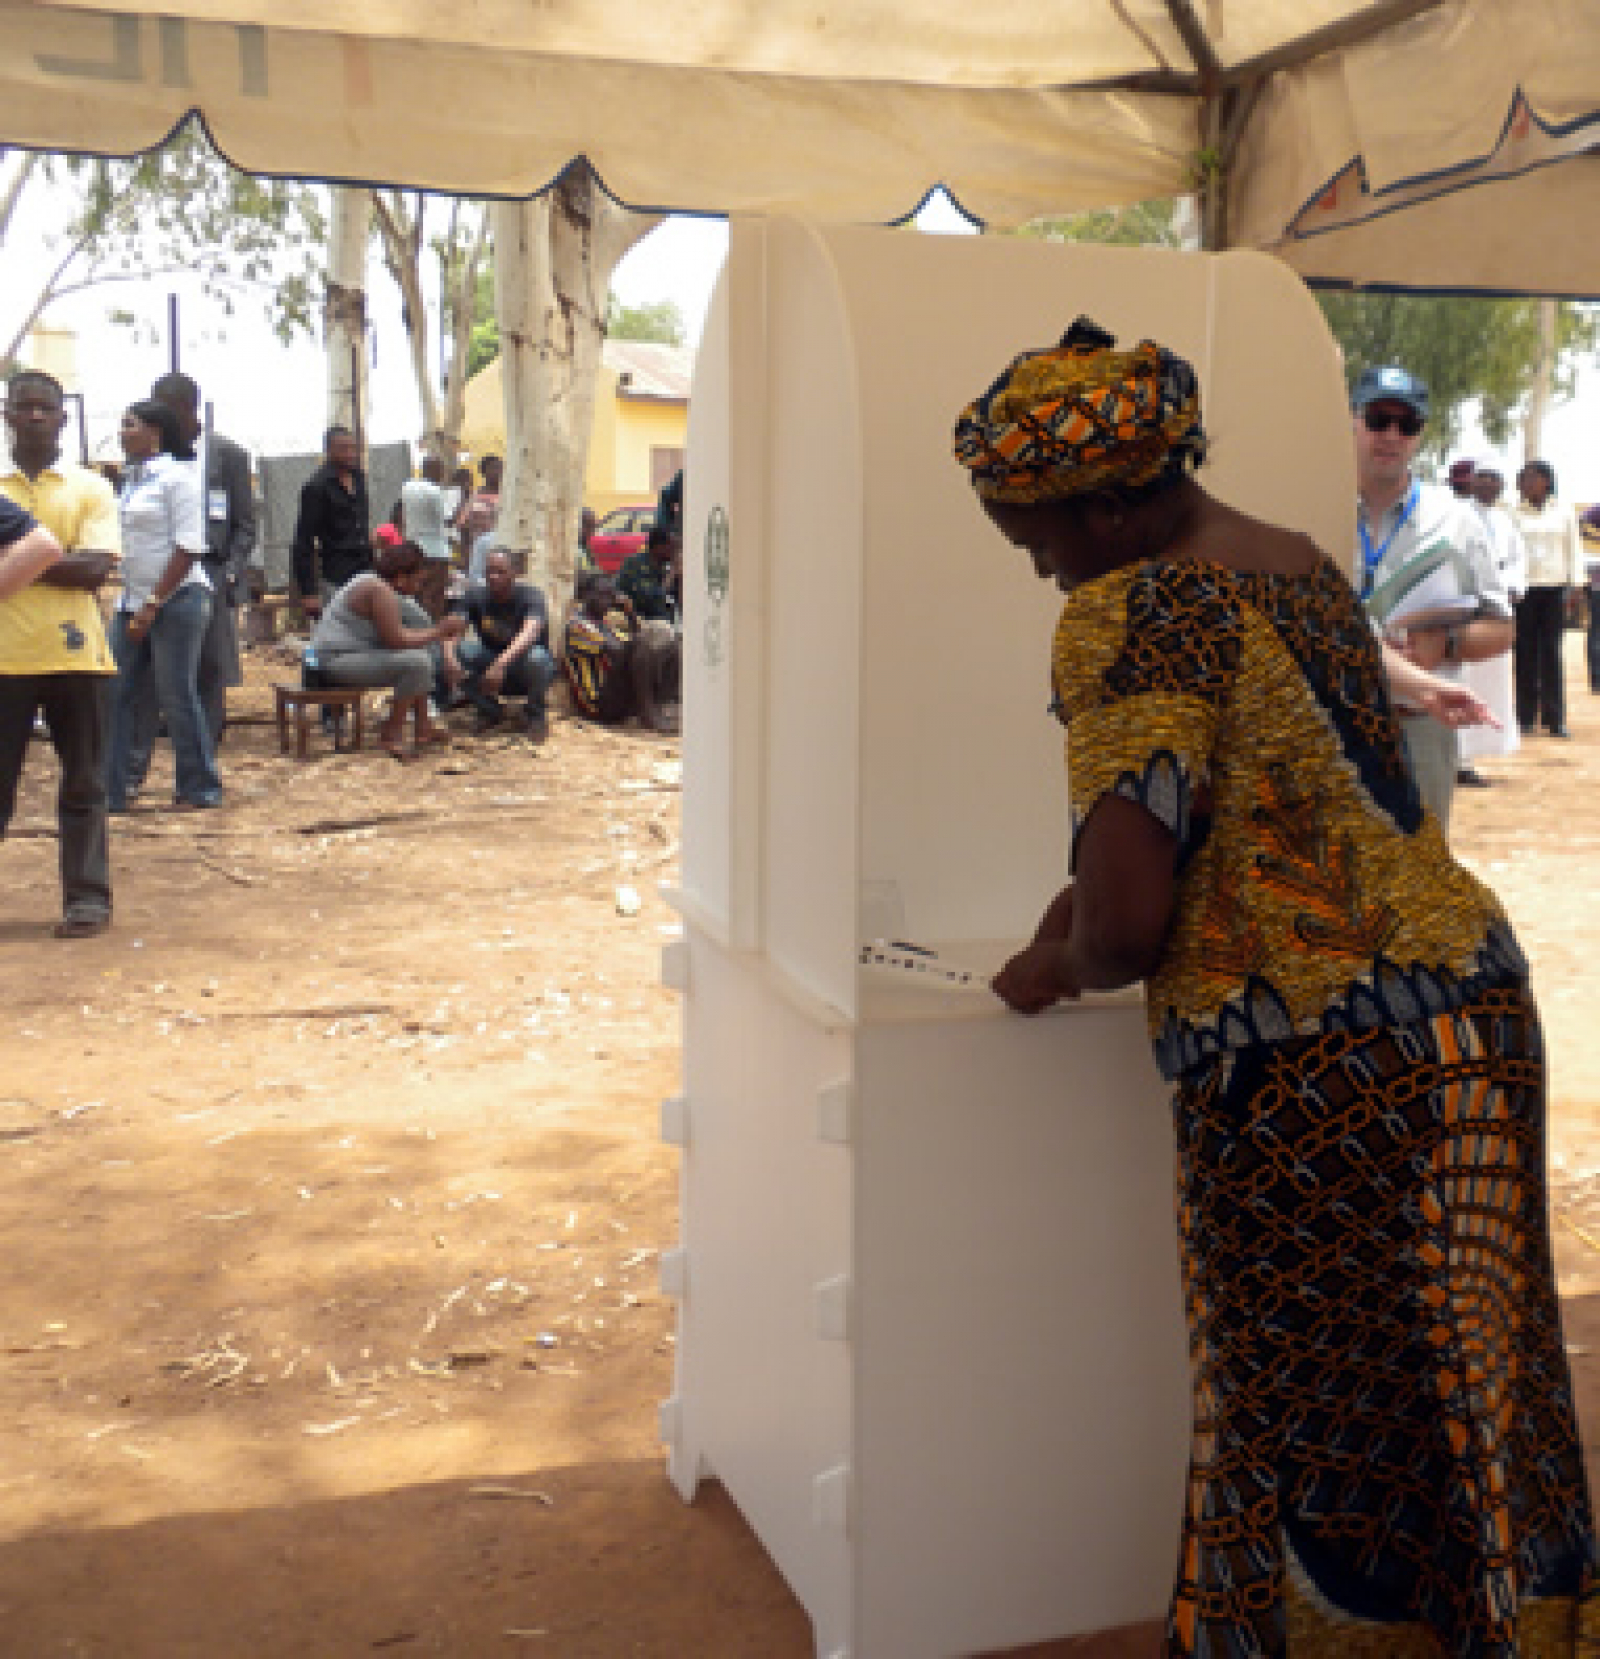 Nigerian Elections Hold the Promise of Setting New Integrity Standard, NDI Mission Finds